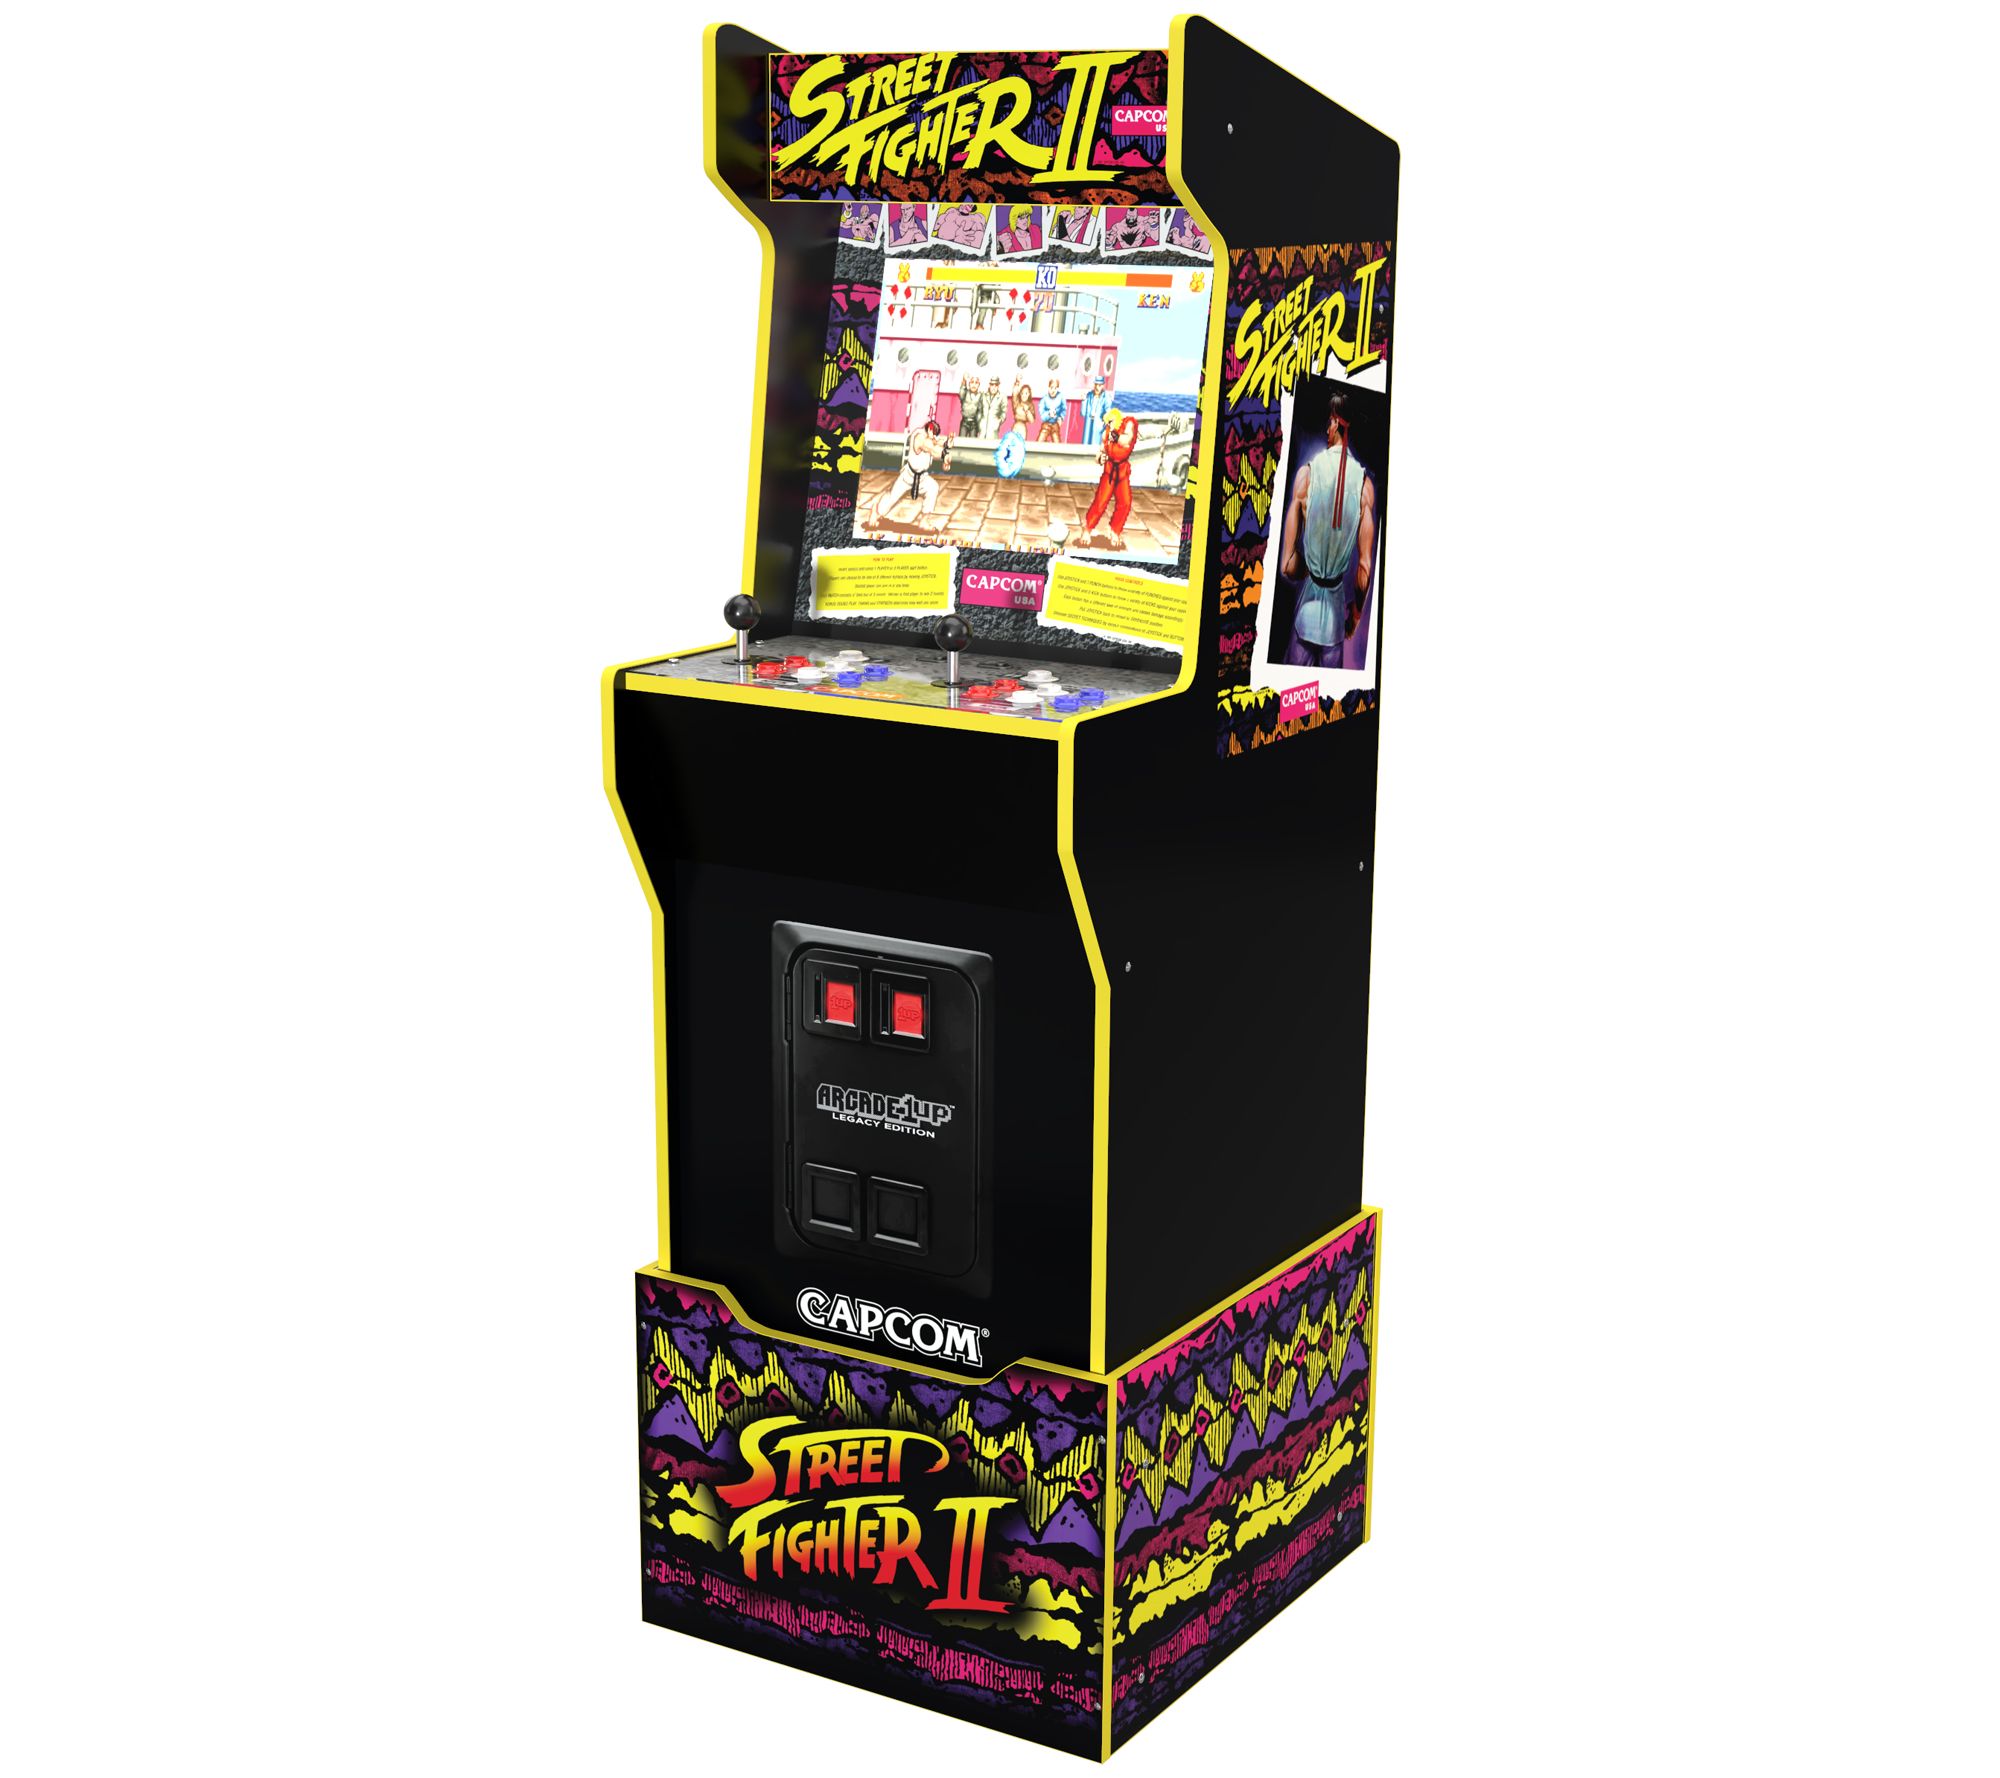 [$299.98] STREET FIGHTER 2 ARCADE1UP 12 in 1! at QVC.com